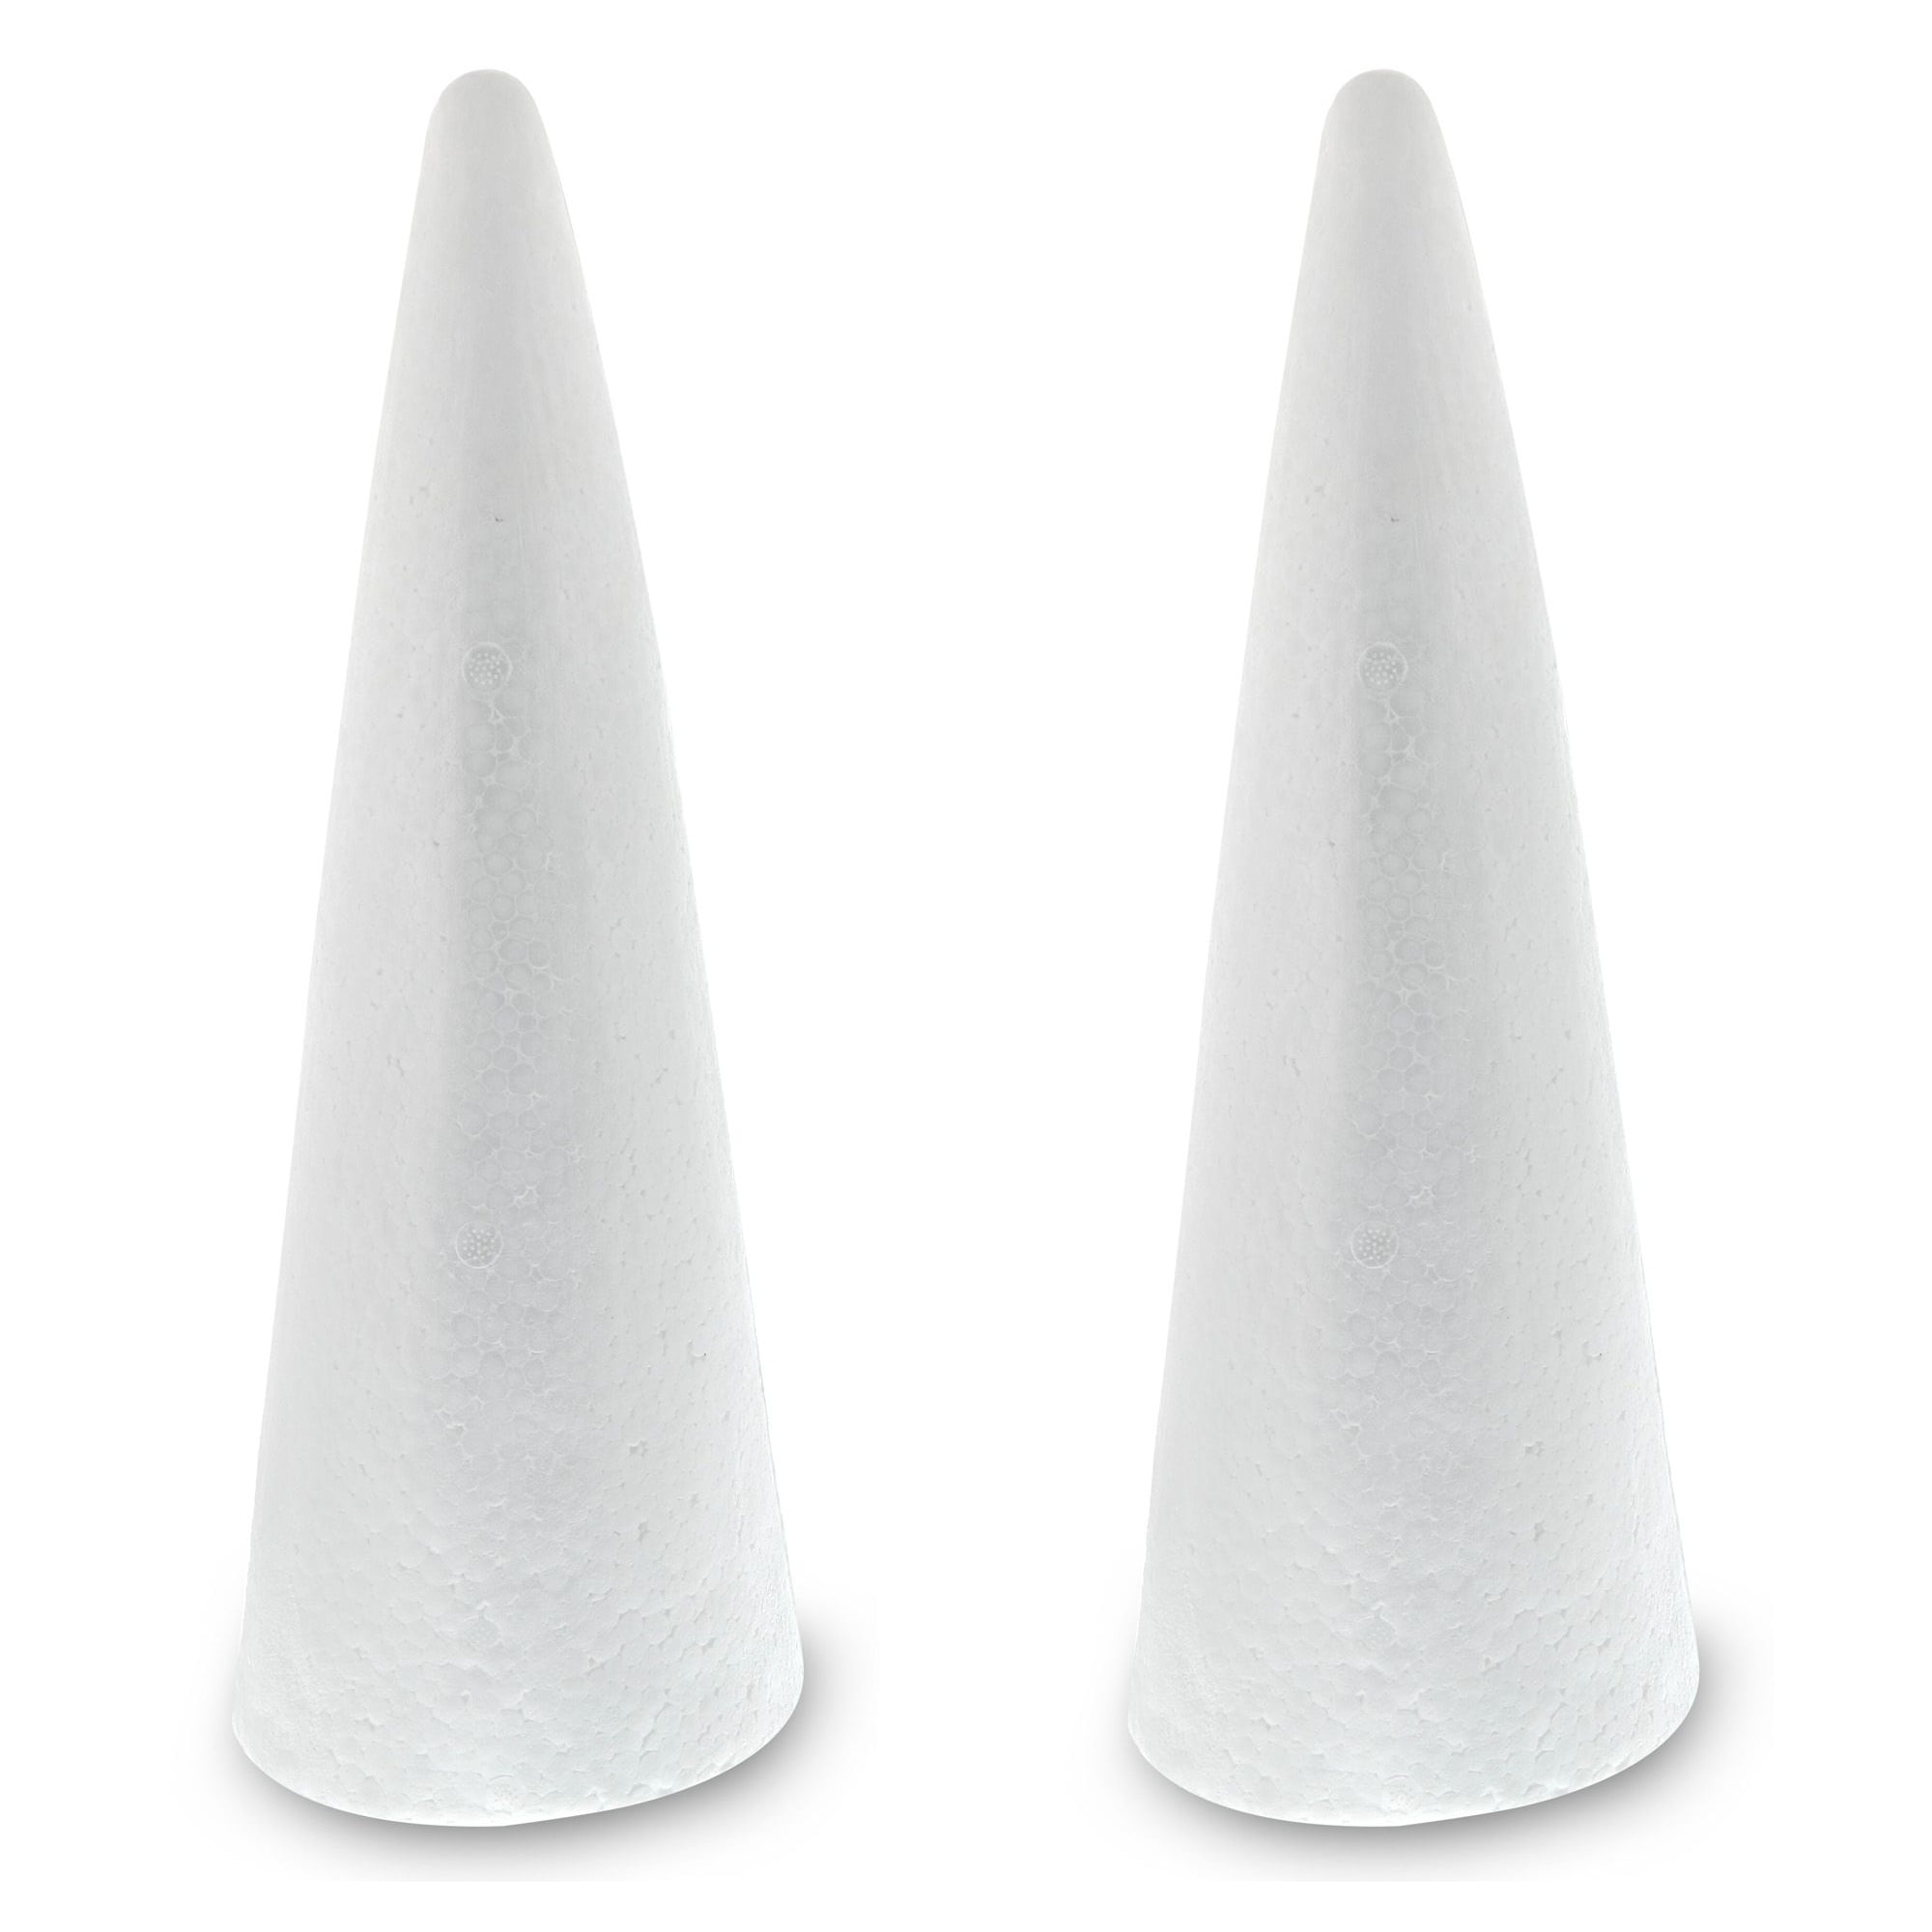  USHOBE 2 Pack Cones for Crafts Foam Tree Cones for DIY Crafts  White Foam Cone Polystyrene Cone Shapes Crafts for Home Party Childrens Day  Wedding Xmas Decoration : Arts, Crafts 